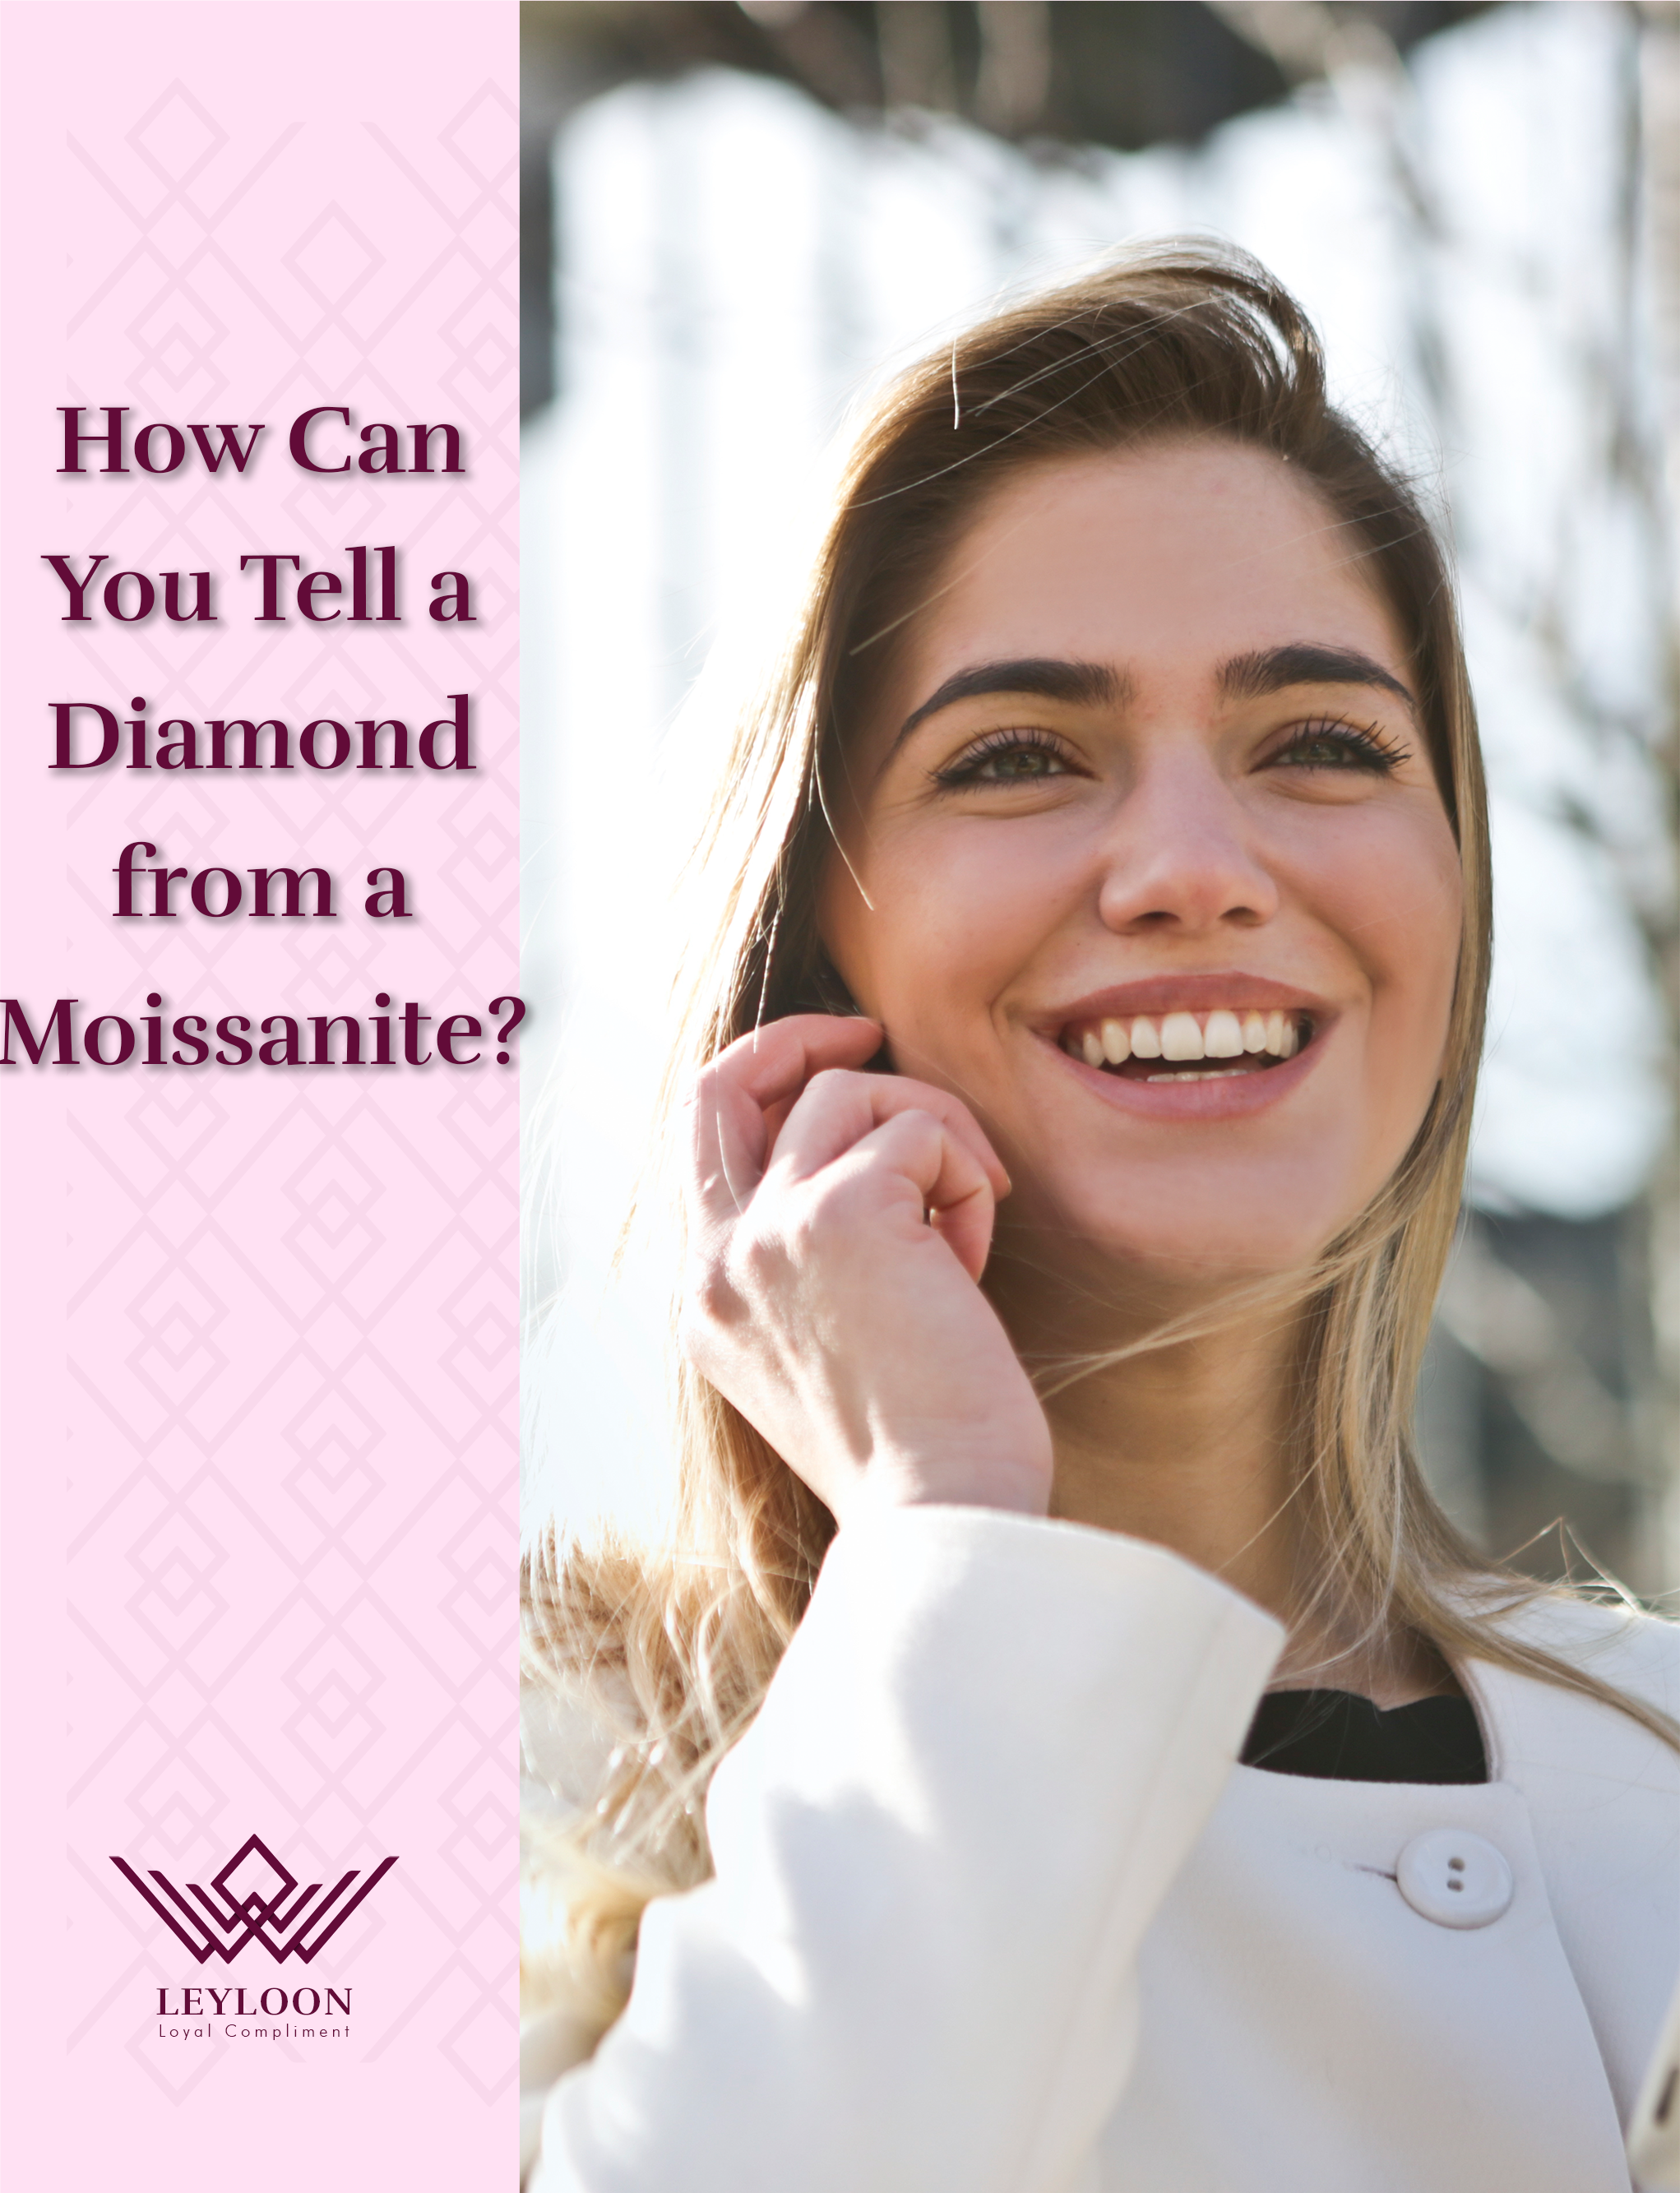 How Can You Tell a Diamond from a Moissanite?